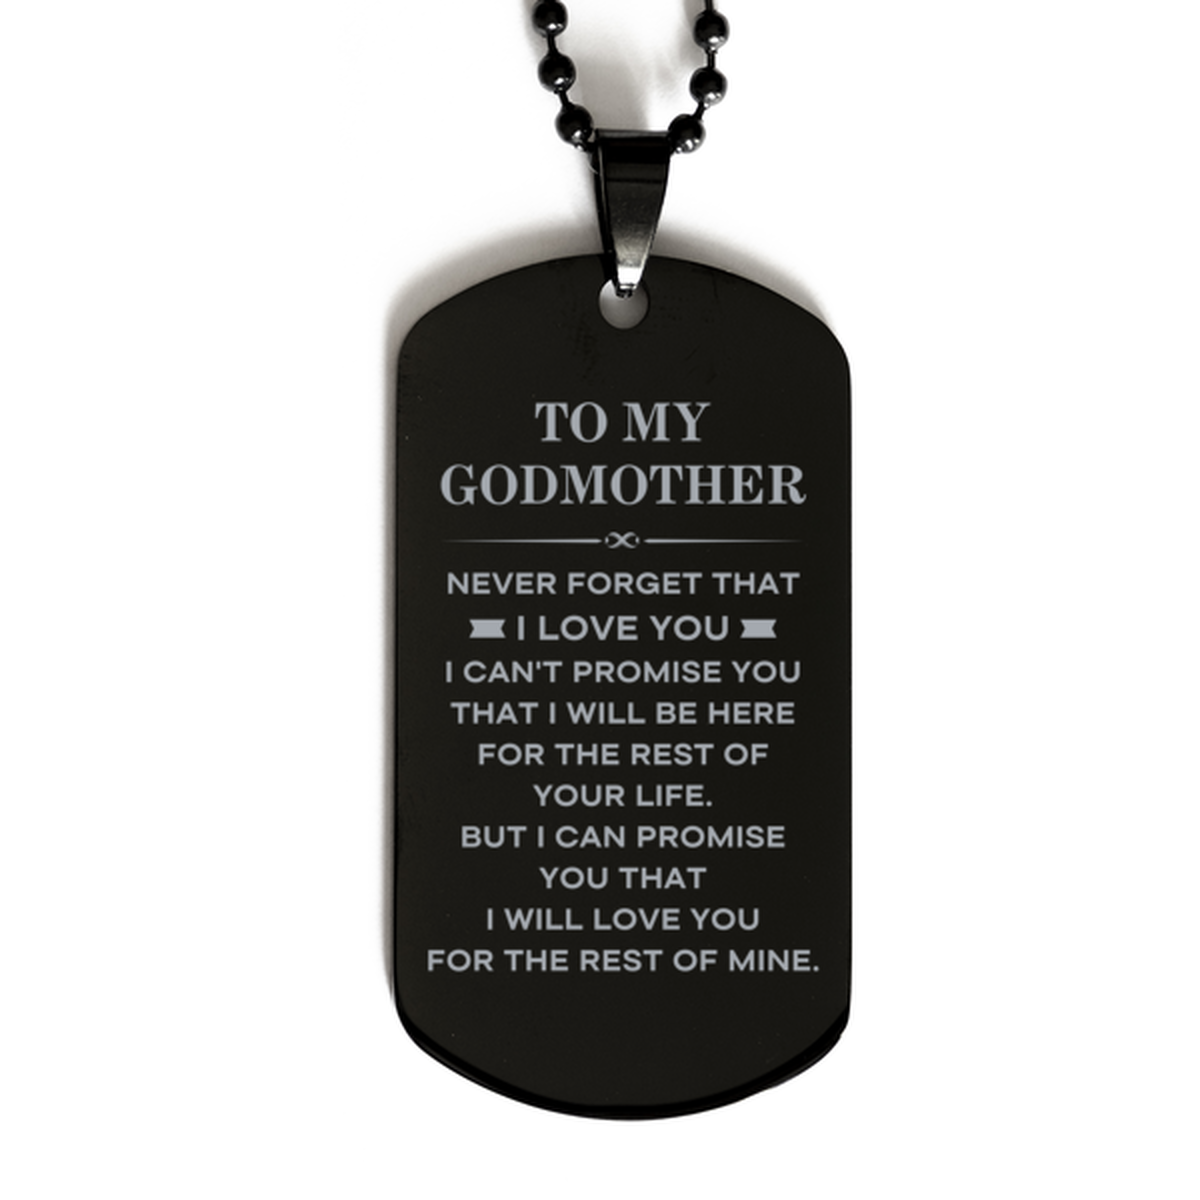 To My Godmother Gifts, I will love you for the rest of mine, Love Godmother Dog Tag Necklace, Birthday Christmas Unique Black Dog Tag For Godmother